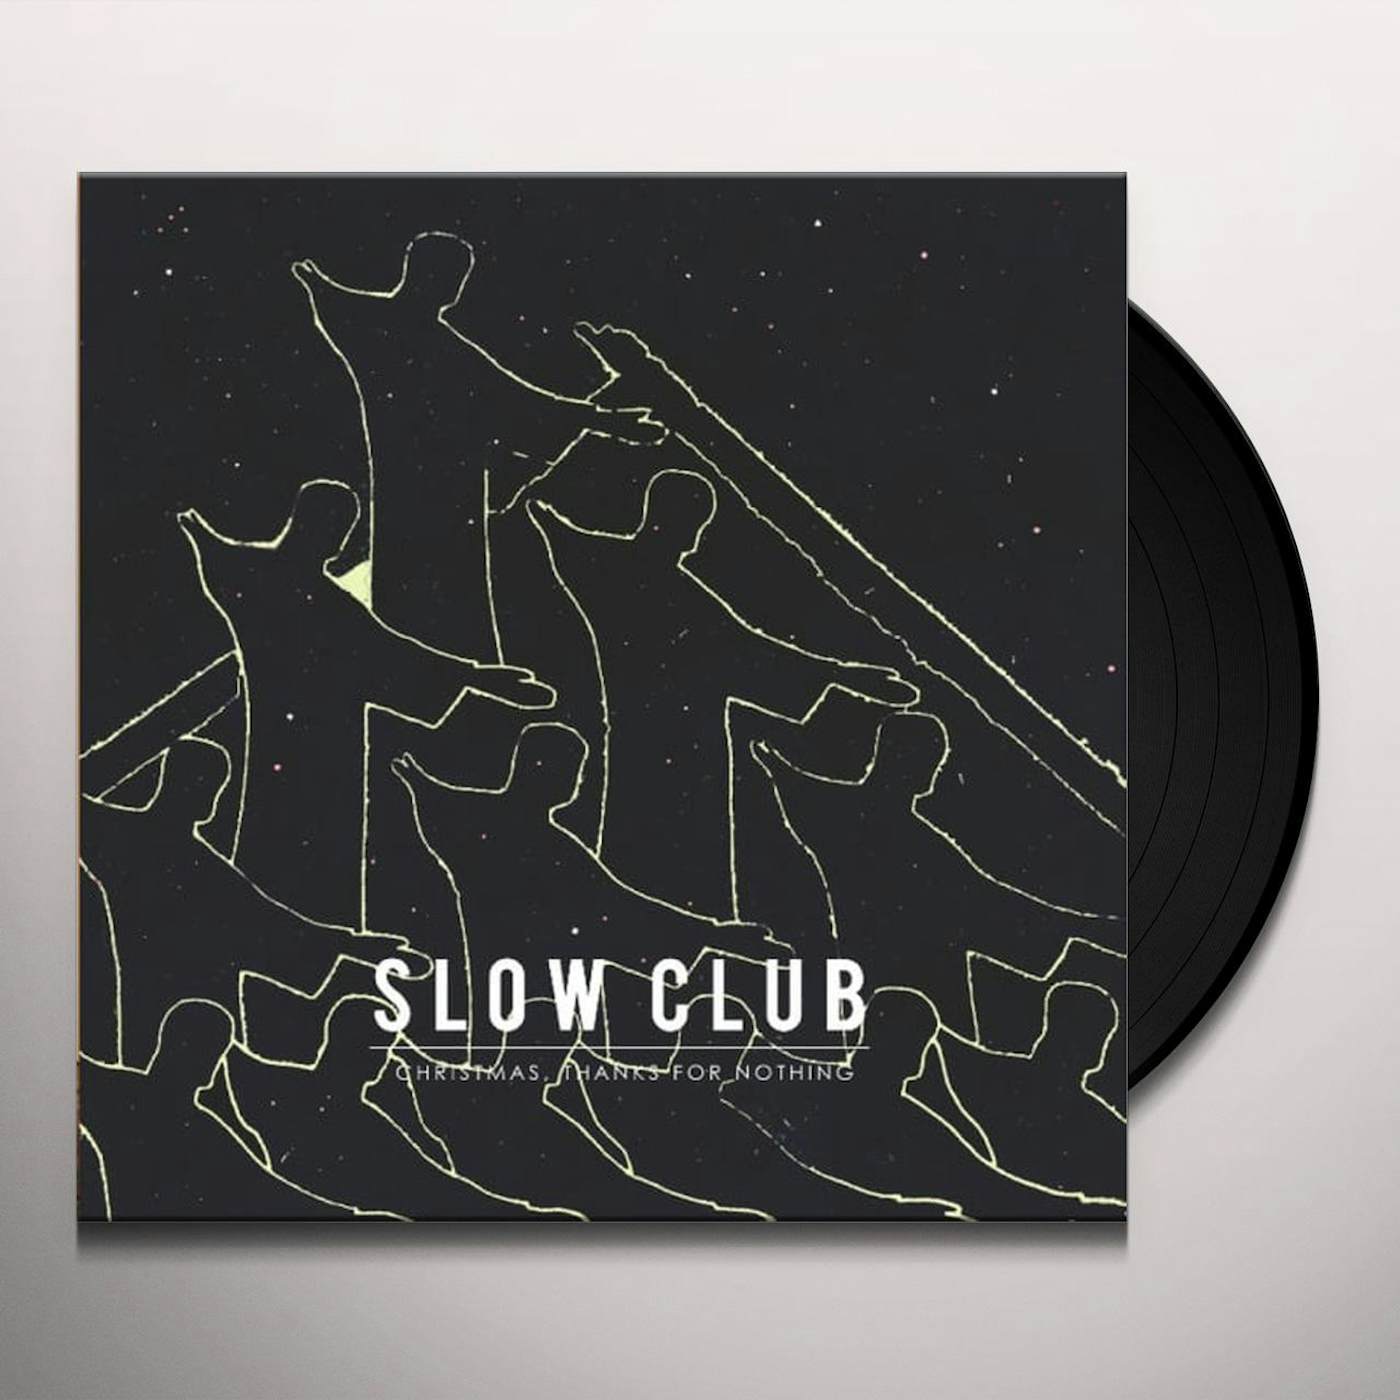 Slow Club CHRISTMAS THANKS FOR NOTHING Vinyl Record